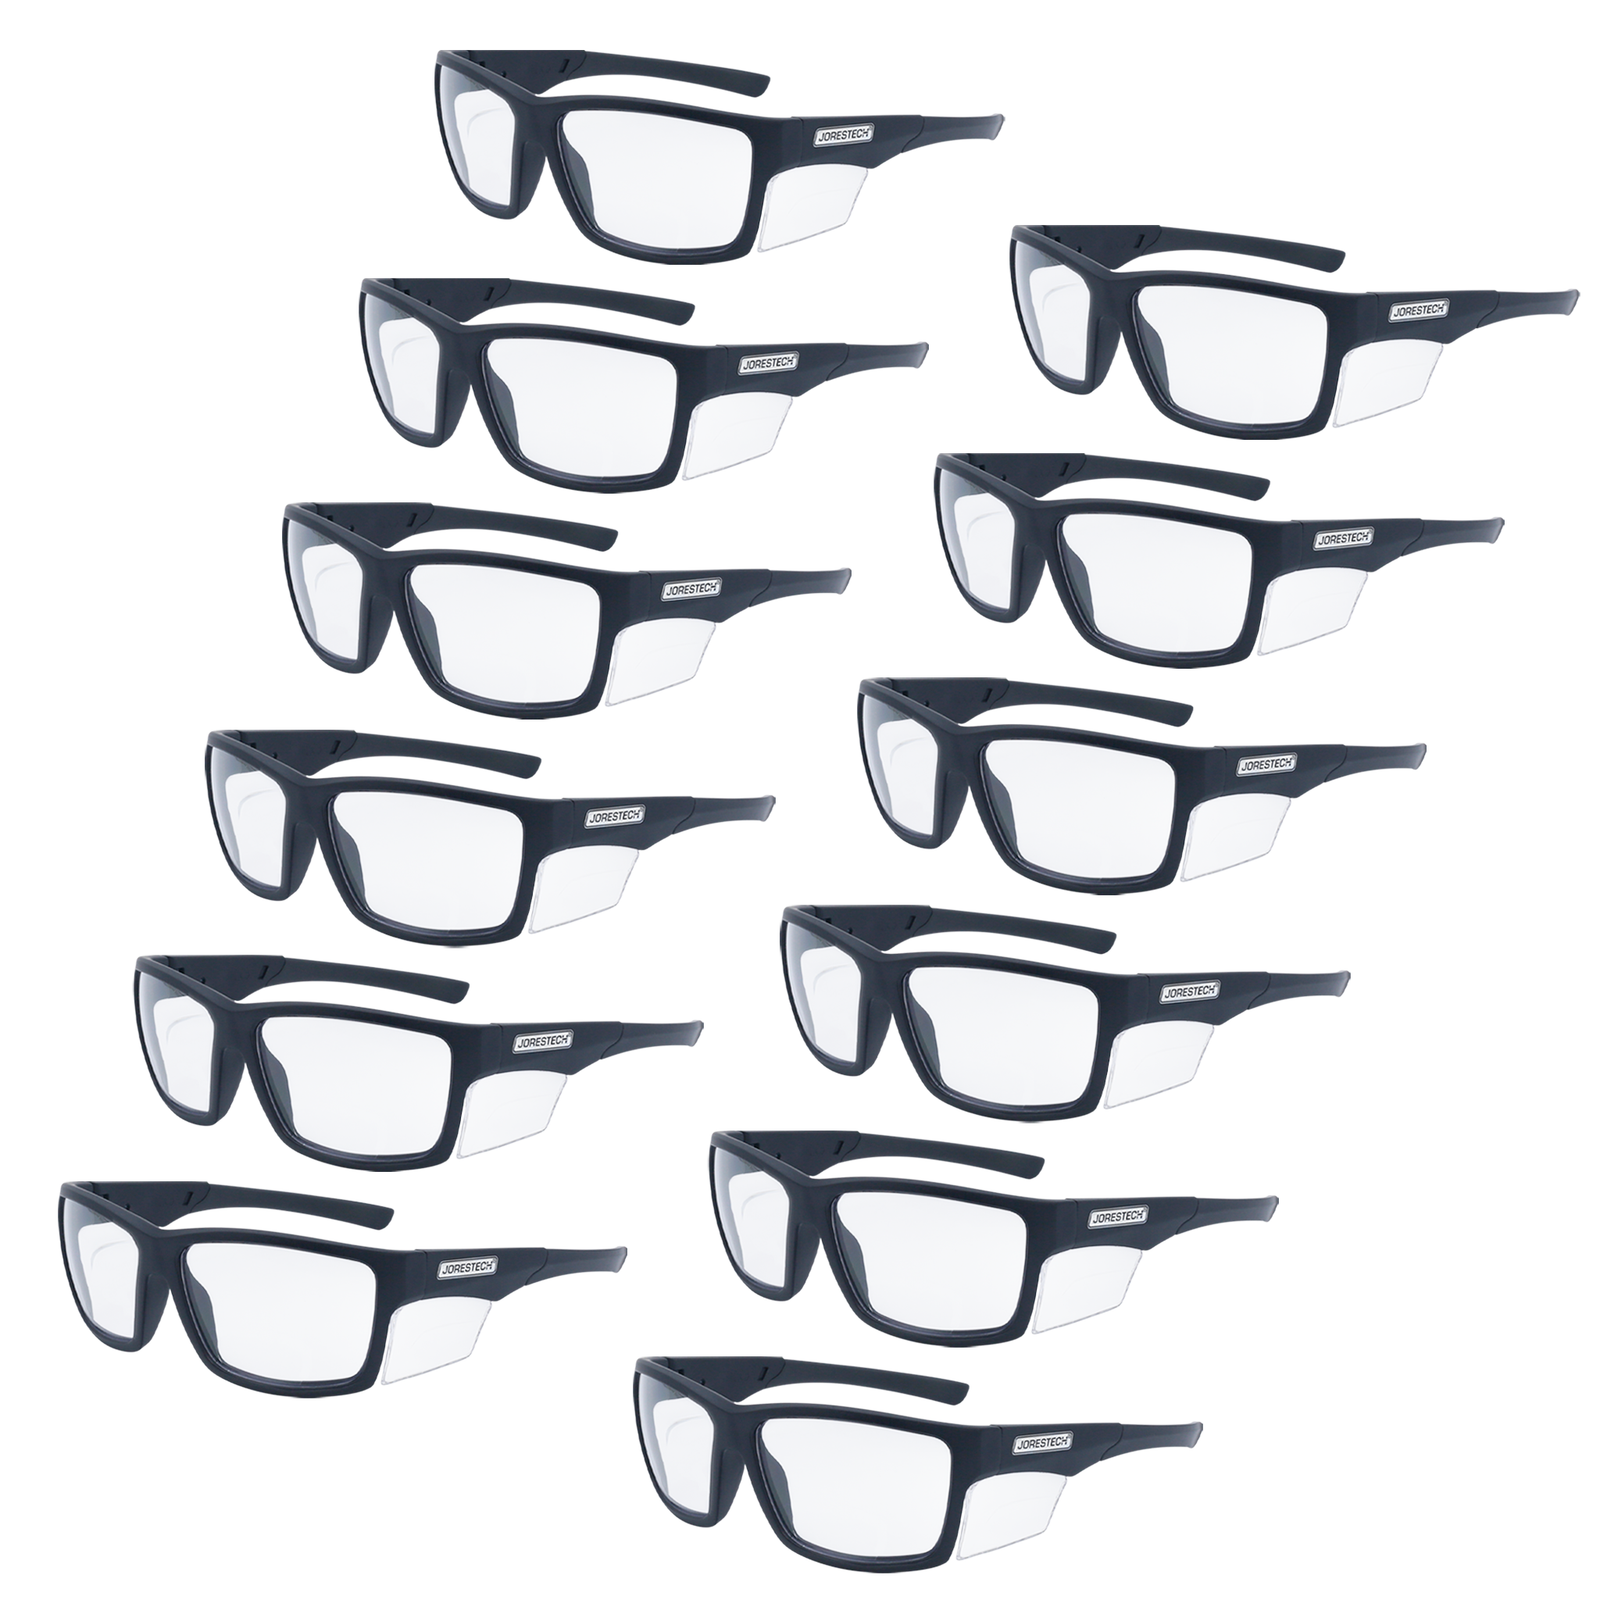 Image shows 12 pairs of JORESTECH clear safety glasses with clear side shield for high impact protection. These ANSI compliant safety glasses have black frame and clear polycarbonate lenses. The background of the image is white